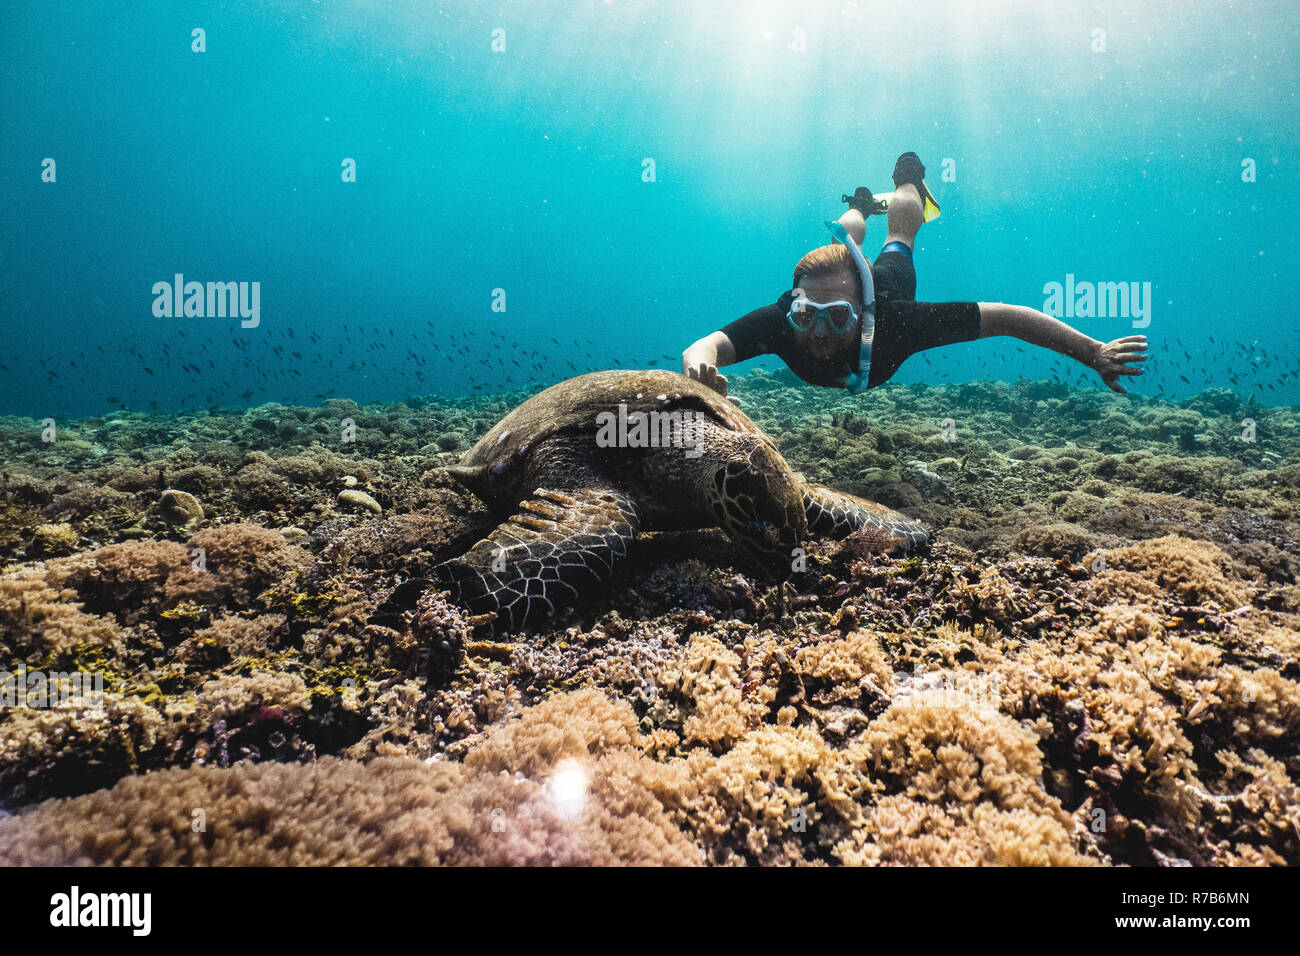 Freediver man with cute turtle Stock Photo